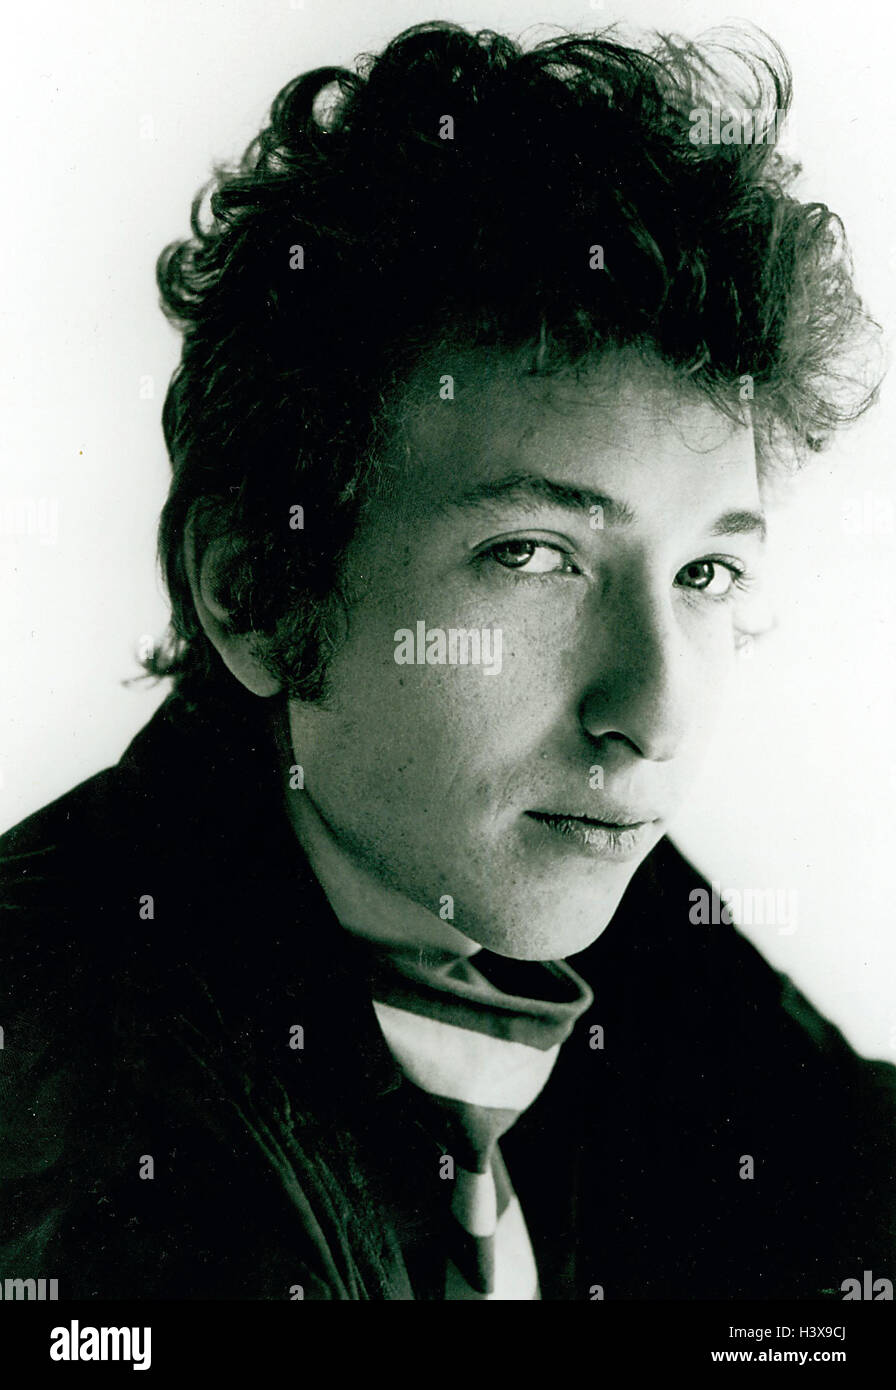 October 13, 2016 - UNDATED FILE PHOTO - BOB DYLAN, American singer songwriter, poet, folk and rock musician has been awarded the 2016 Nobel Prize for Literature. Dylan sings, plays guitar, harmonica and piano and is considered one of the most influential music makers of the 20th Century. PICTURED - Date and Place Unknown.  (Credit Image: © Dm/Globe Photos/ZUMAPRESS.com) Stock Photo